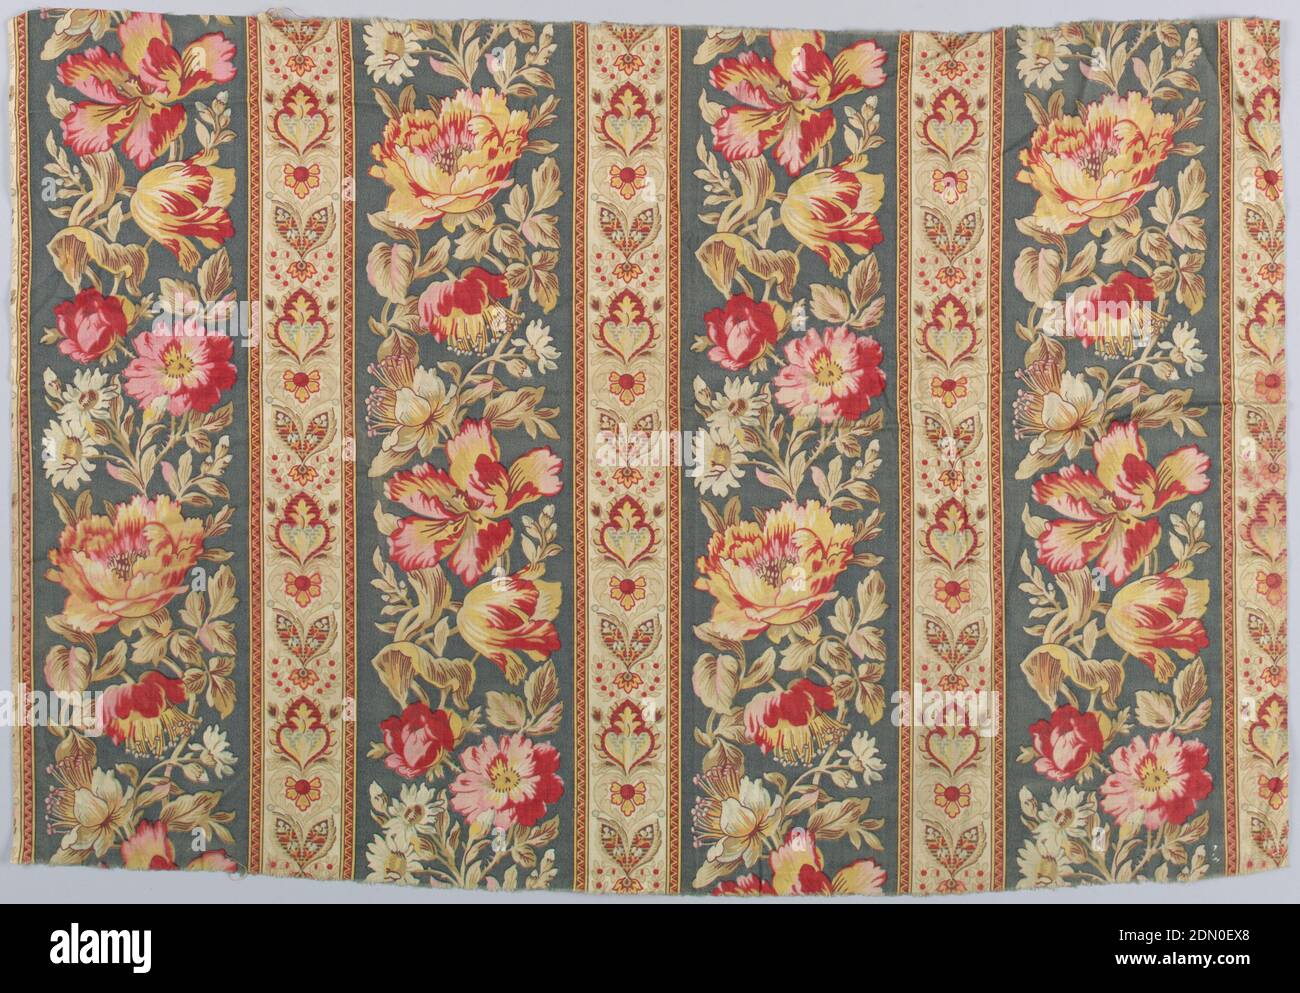 Textile, Medium: cotton Technique: printed by engraved roller on plain weave, Half dropped curving vine floral stripe on a dark grey background four inch wide alternating with a two inch wide stripe containing symmetrical floral forms. Full repeat length of wider floral stripe., Europe or USA, 1850–1900, printed, dyed & painted textiles, Textile Stock Photo